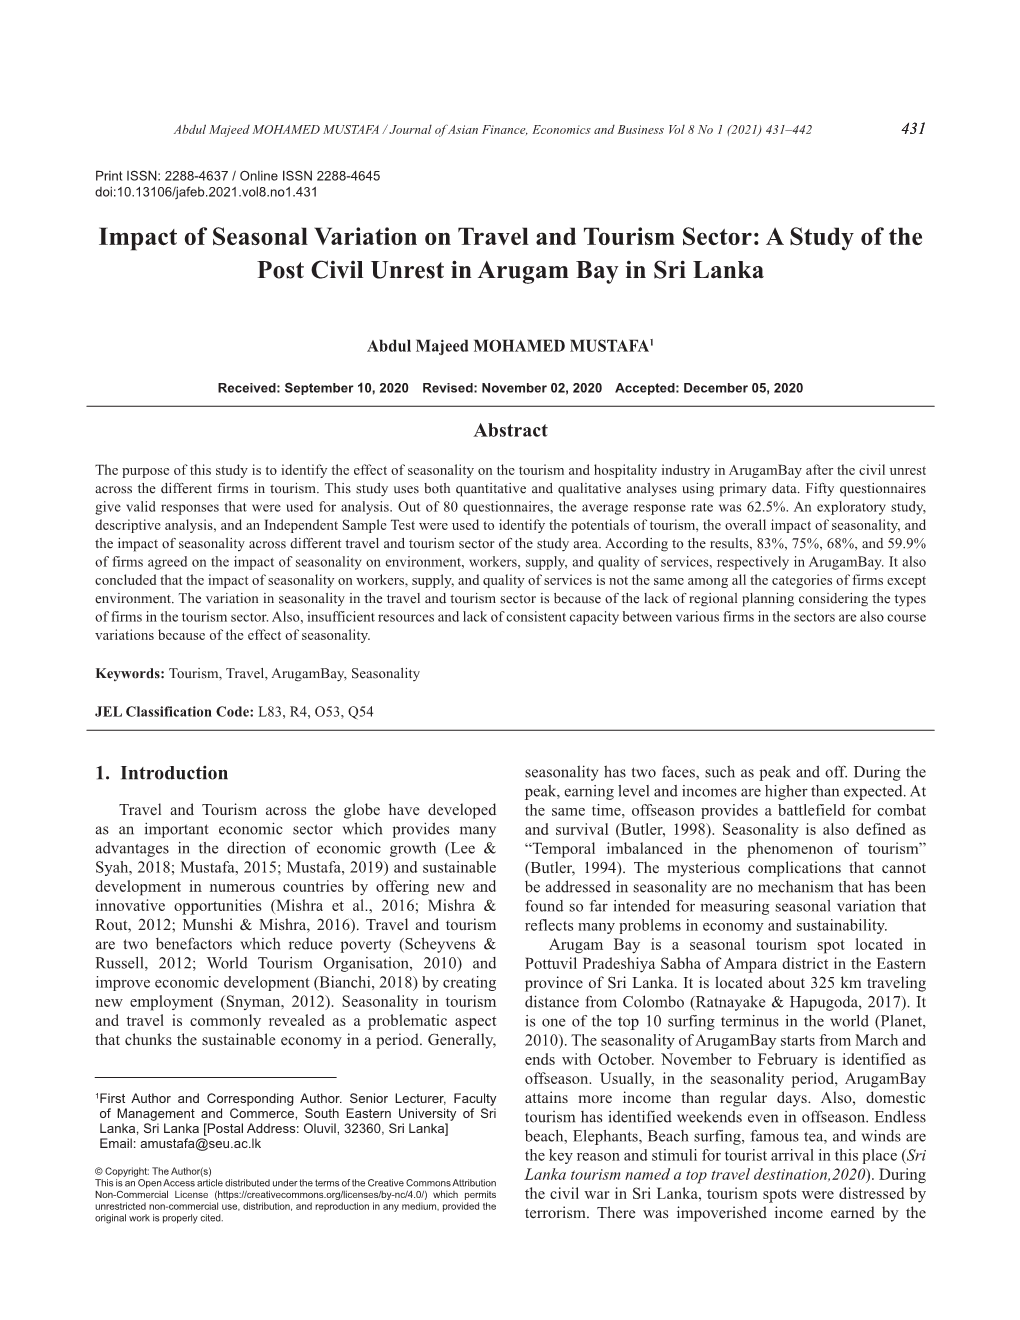 Impact of Seasonal Variation on Travel and Tourism Sector: a Study of the Post Civil Unrest in Arugam Bay in Sri Lanka